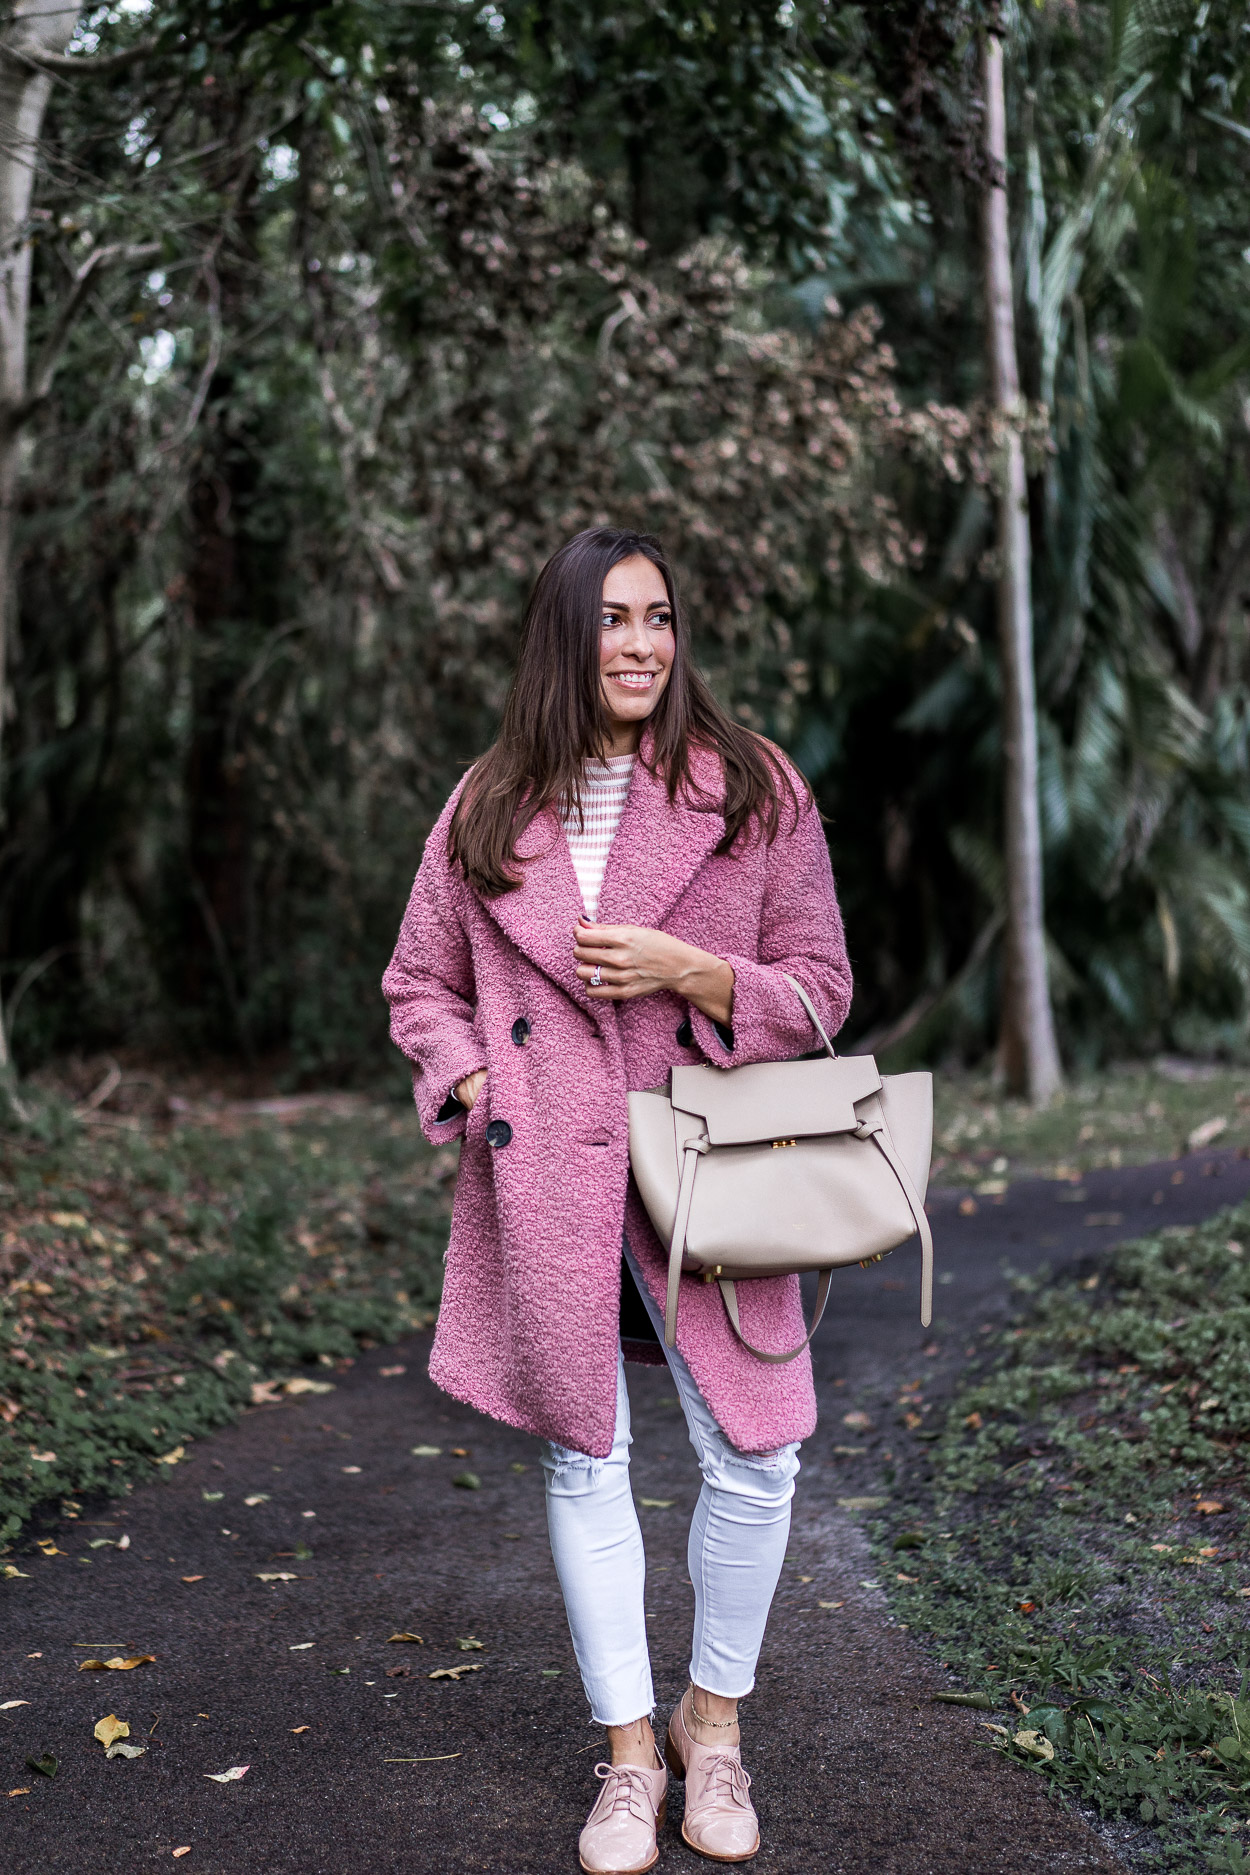 Topshop blush teddy bear coat is this seasons most coveted winter coat